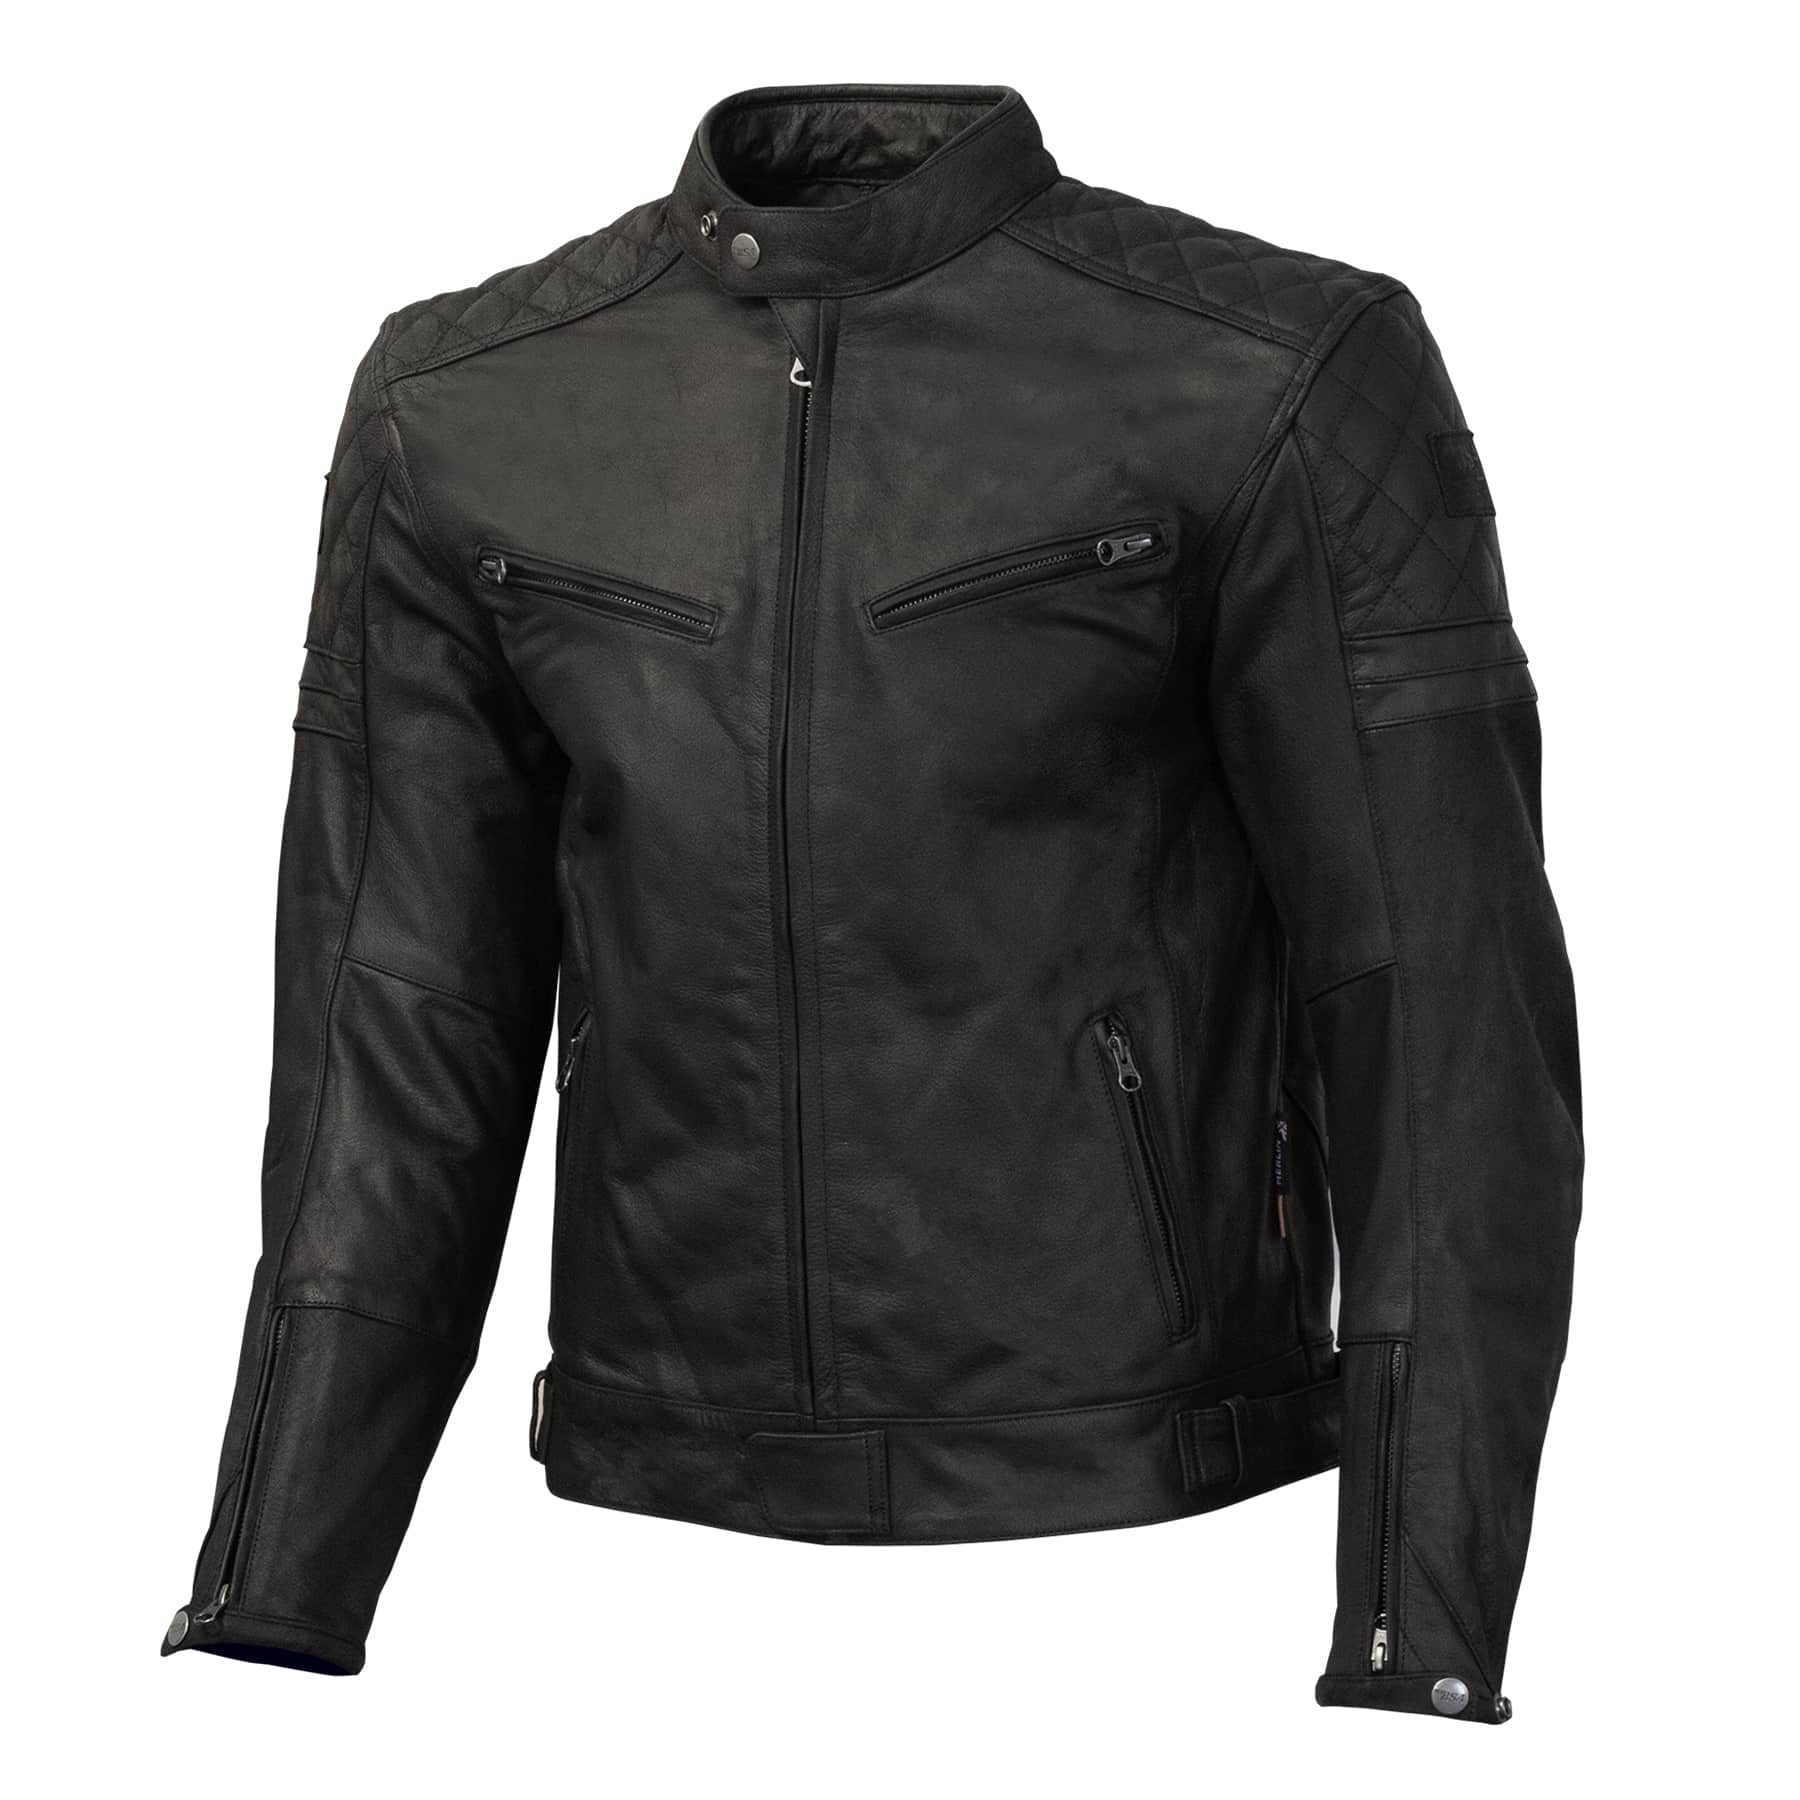 Cheap Real Leather Jackets For Men - Where To Find - Independence Brothers